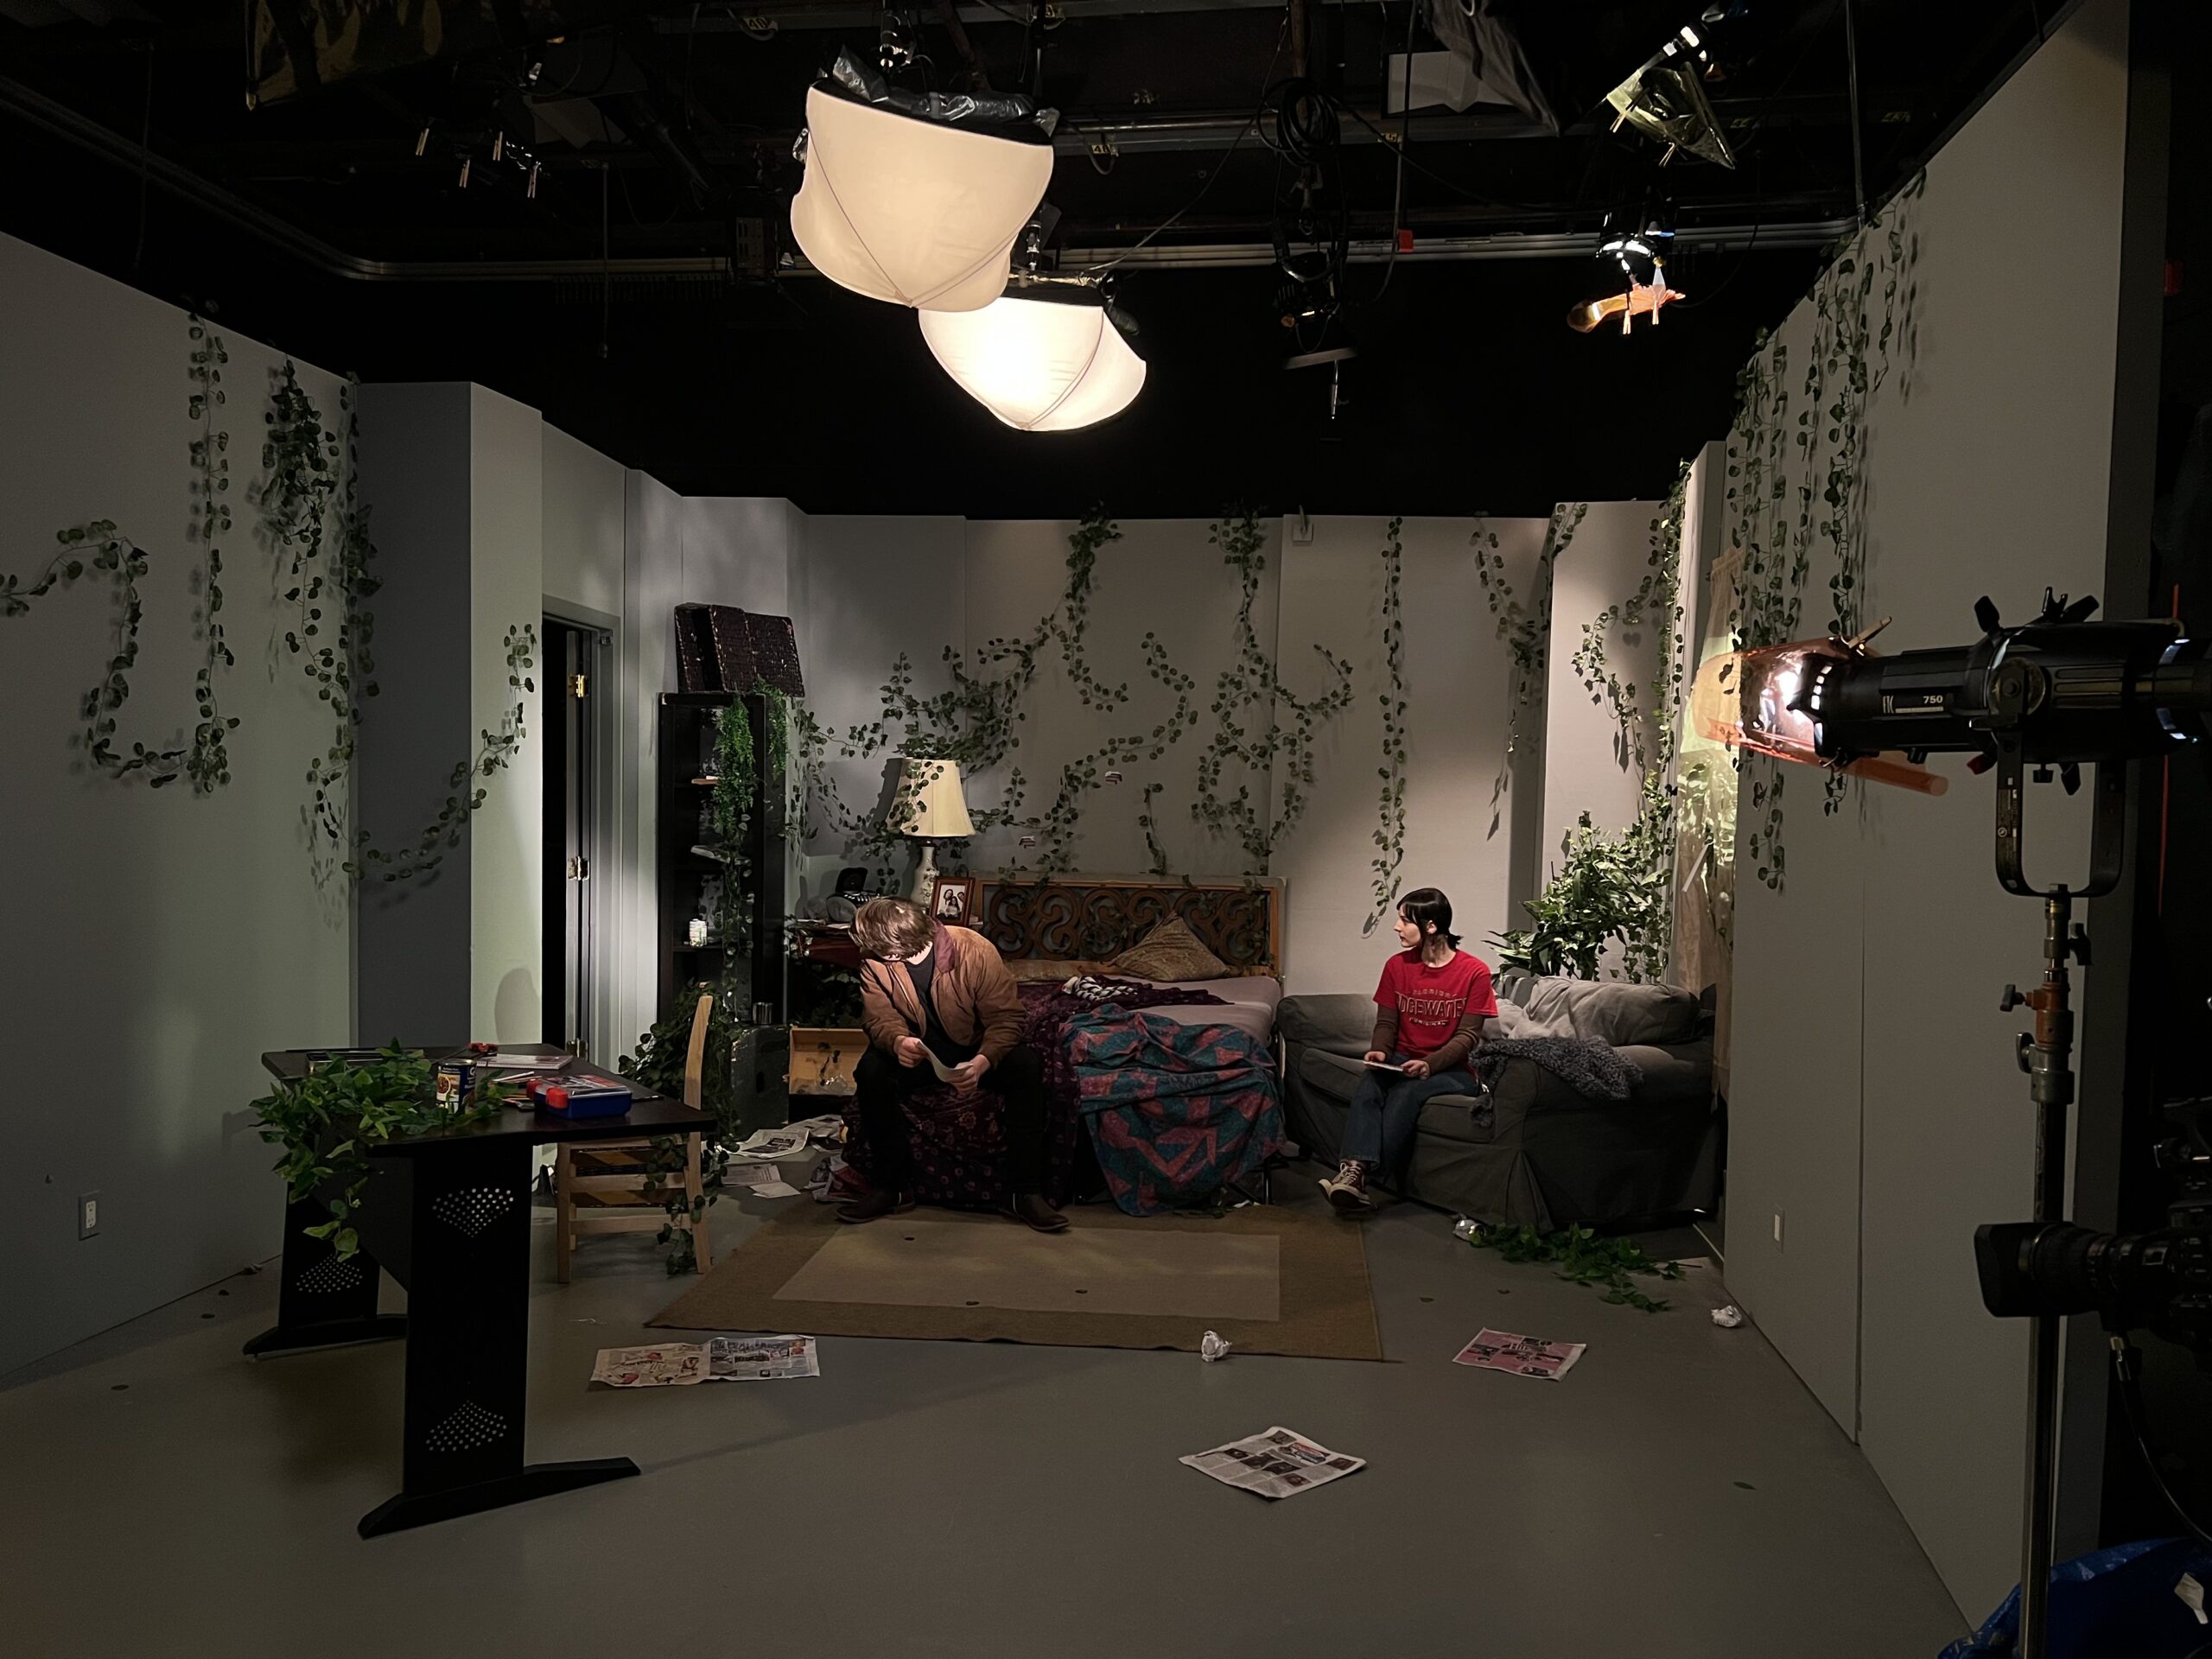 Two students sitting on a couch during a sound recording exercise